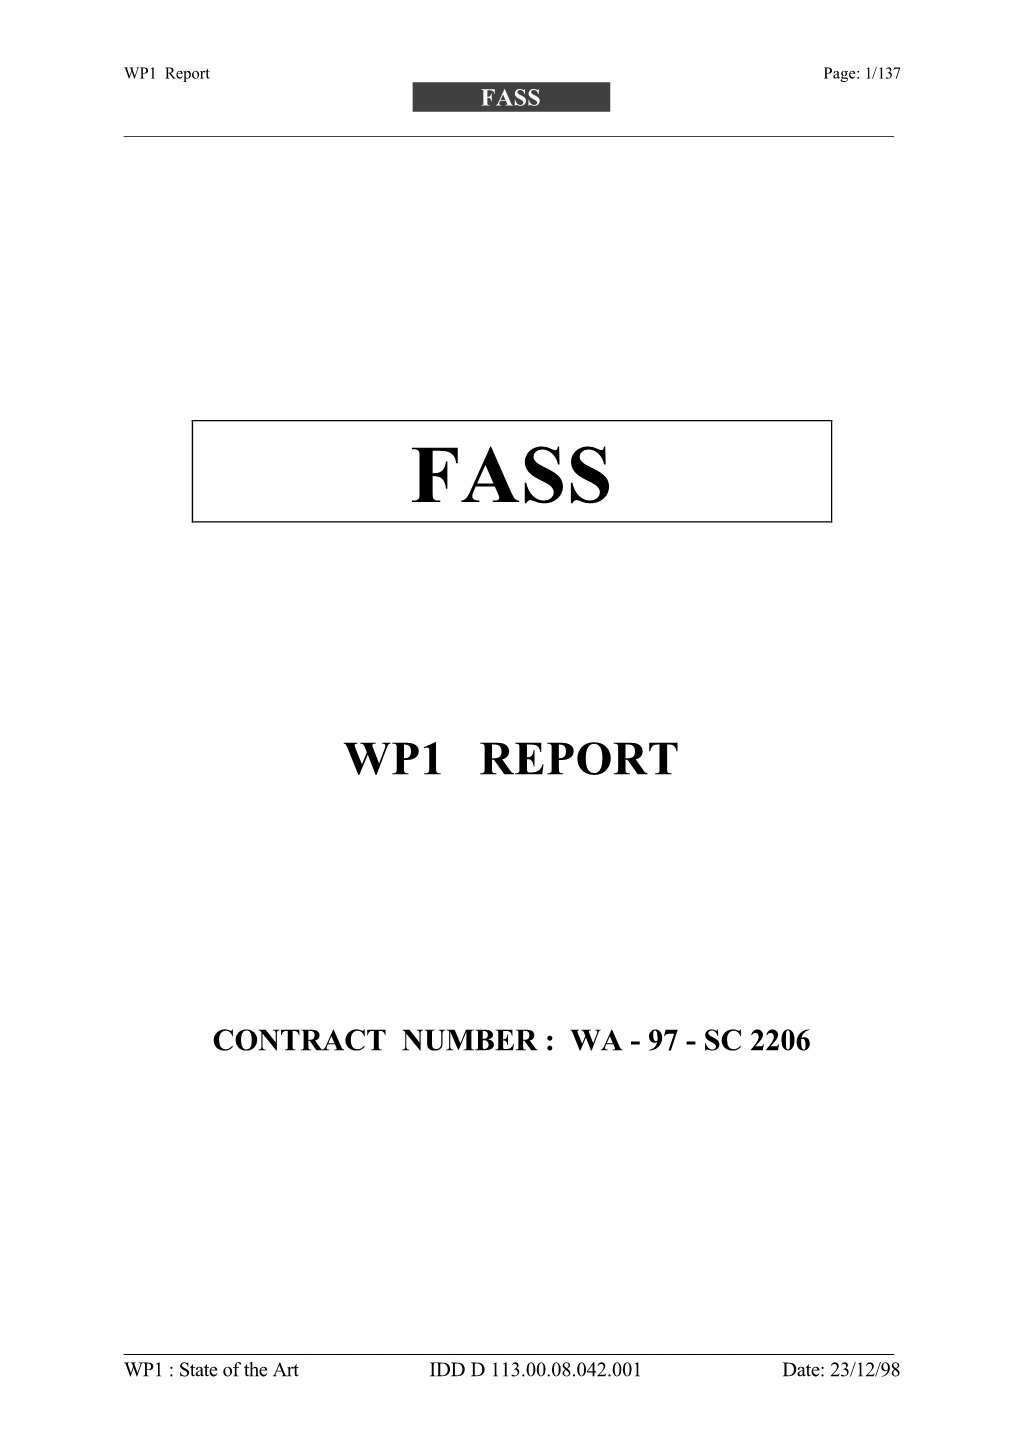 WP1 Report Page: 1/137 FASS ______